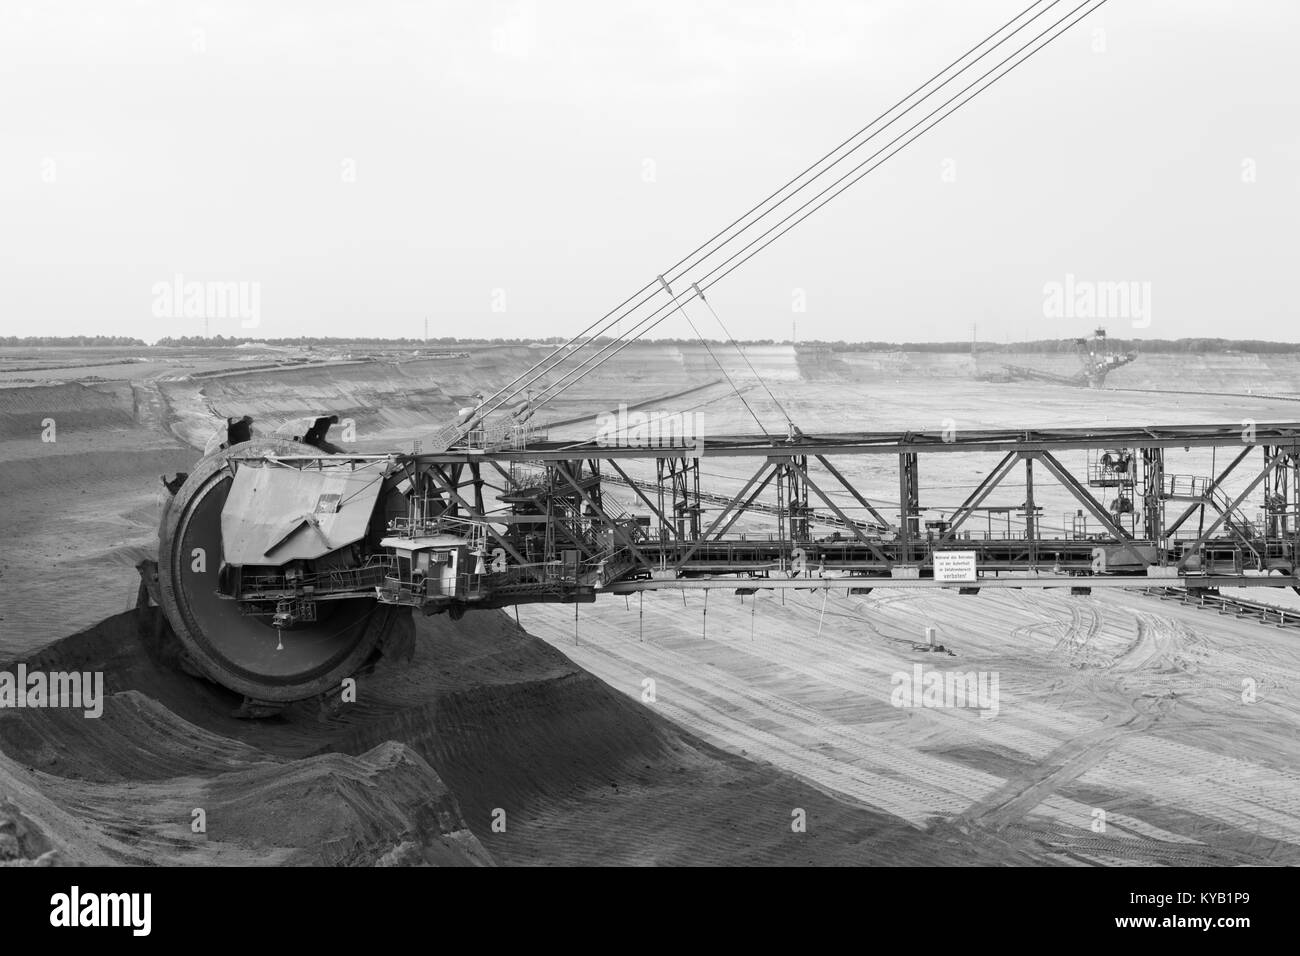 A lignite surface mine with a giant bucket-wheel excavator, one of the worlds largest moving land vehicles in black and white. The wheel has a diamete Stock Photo